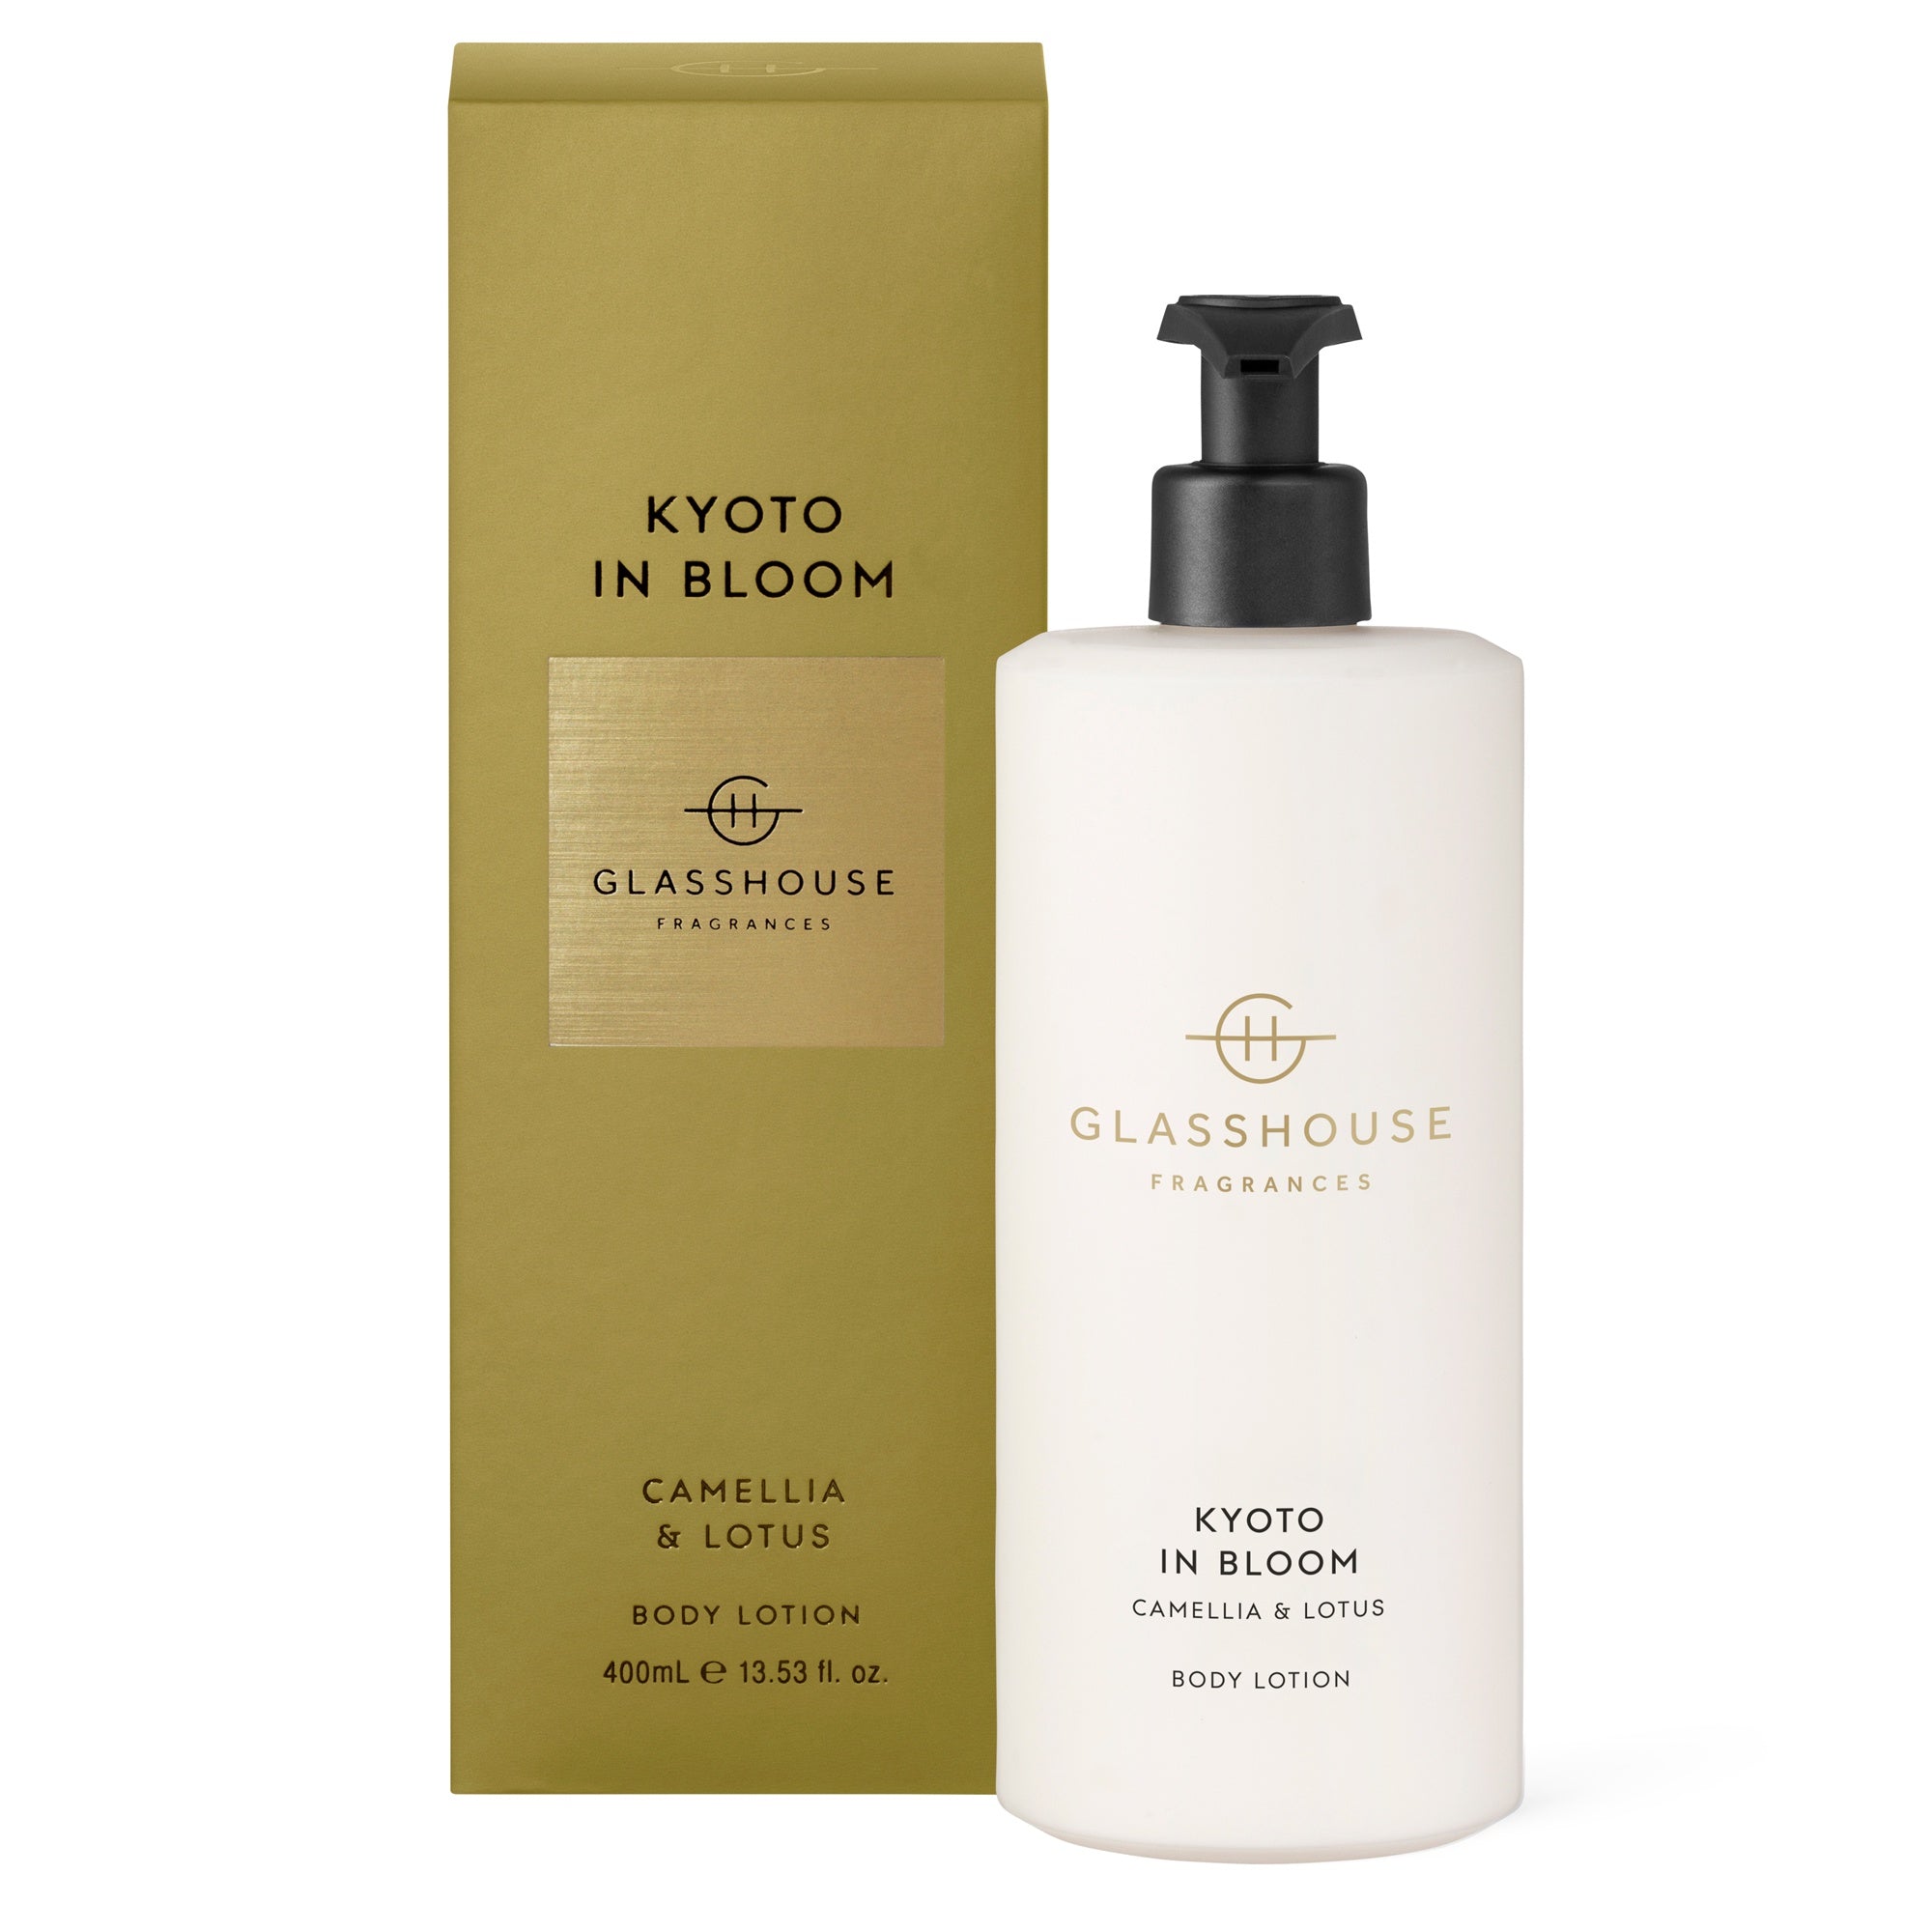 Kyoto in Bloom 400ml Body Lotion